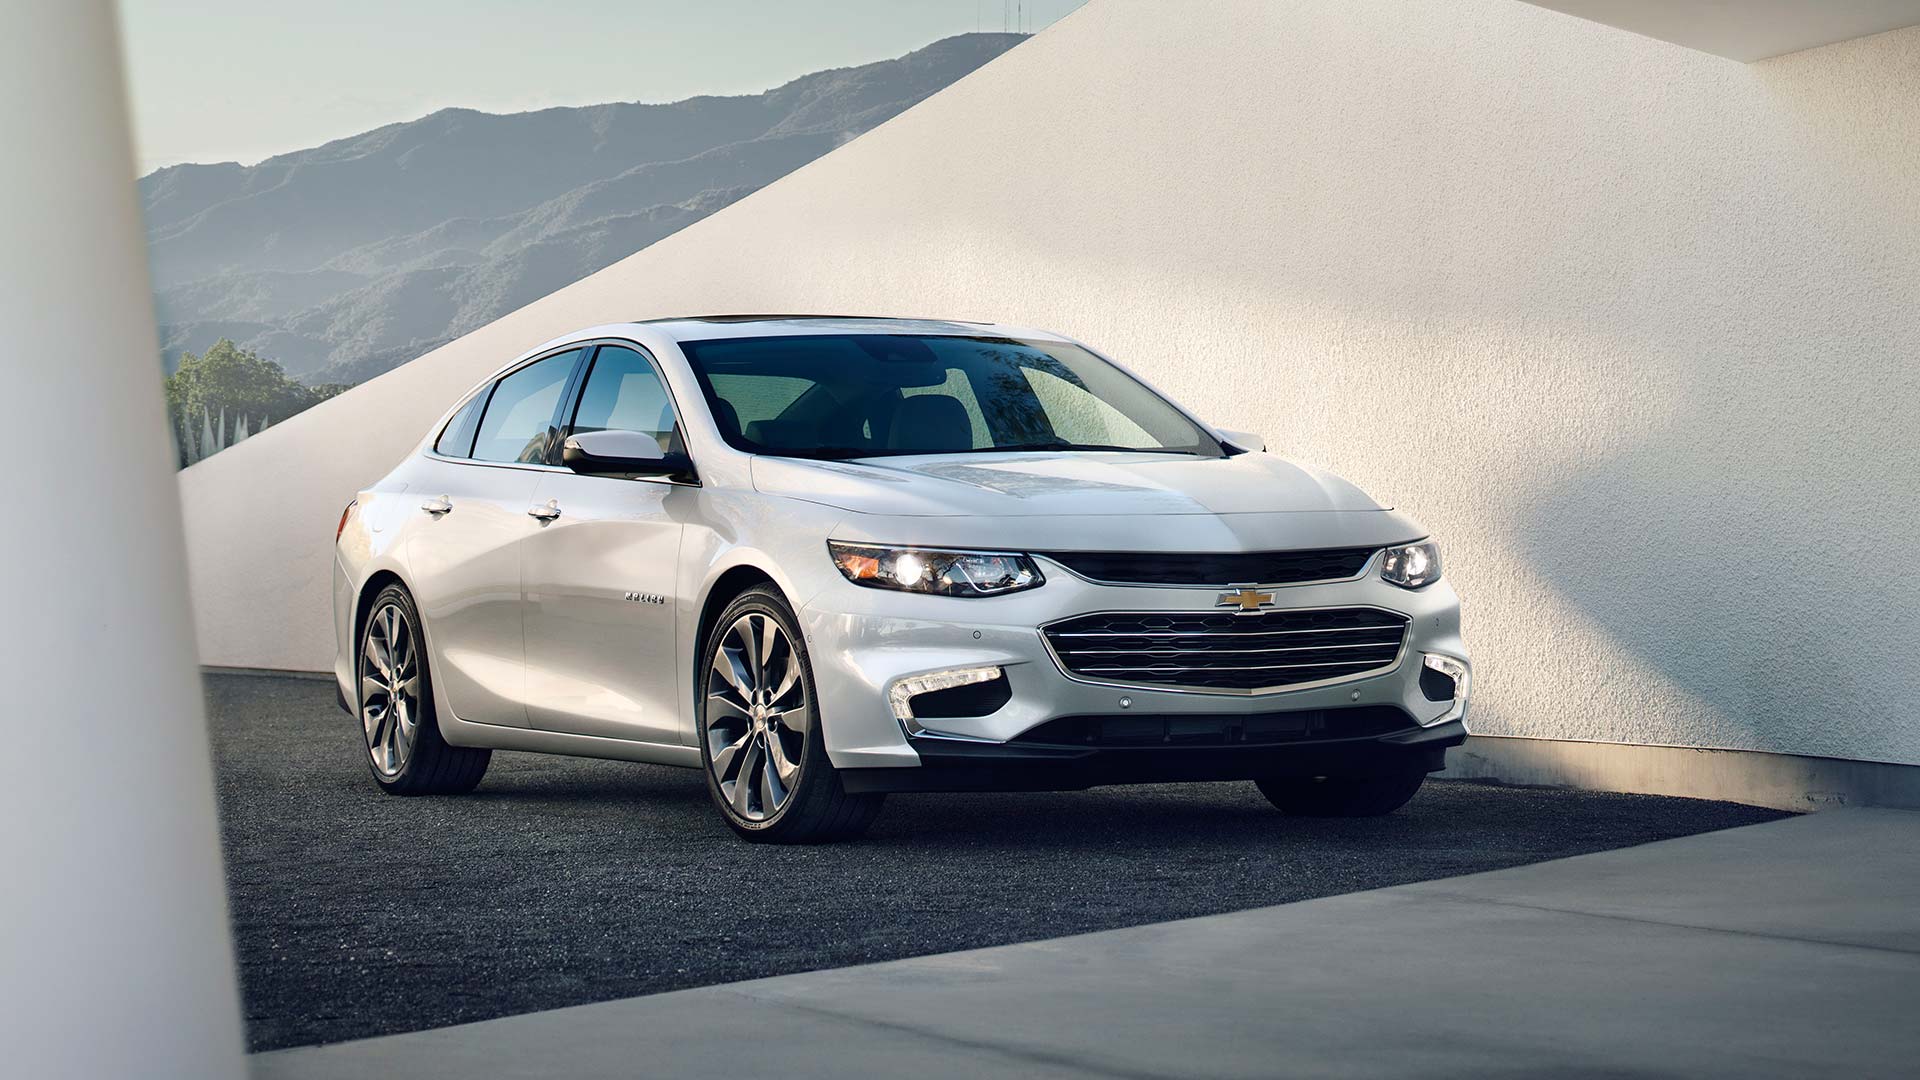 The Award Winning 2016 Chevrolet Malibu in stock at Karl Chevrolet in New Canaan CT